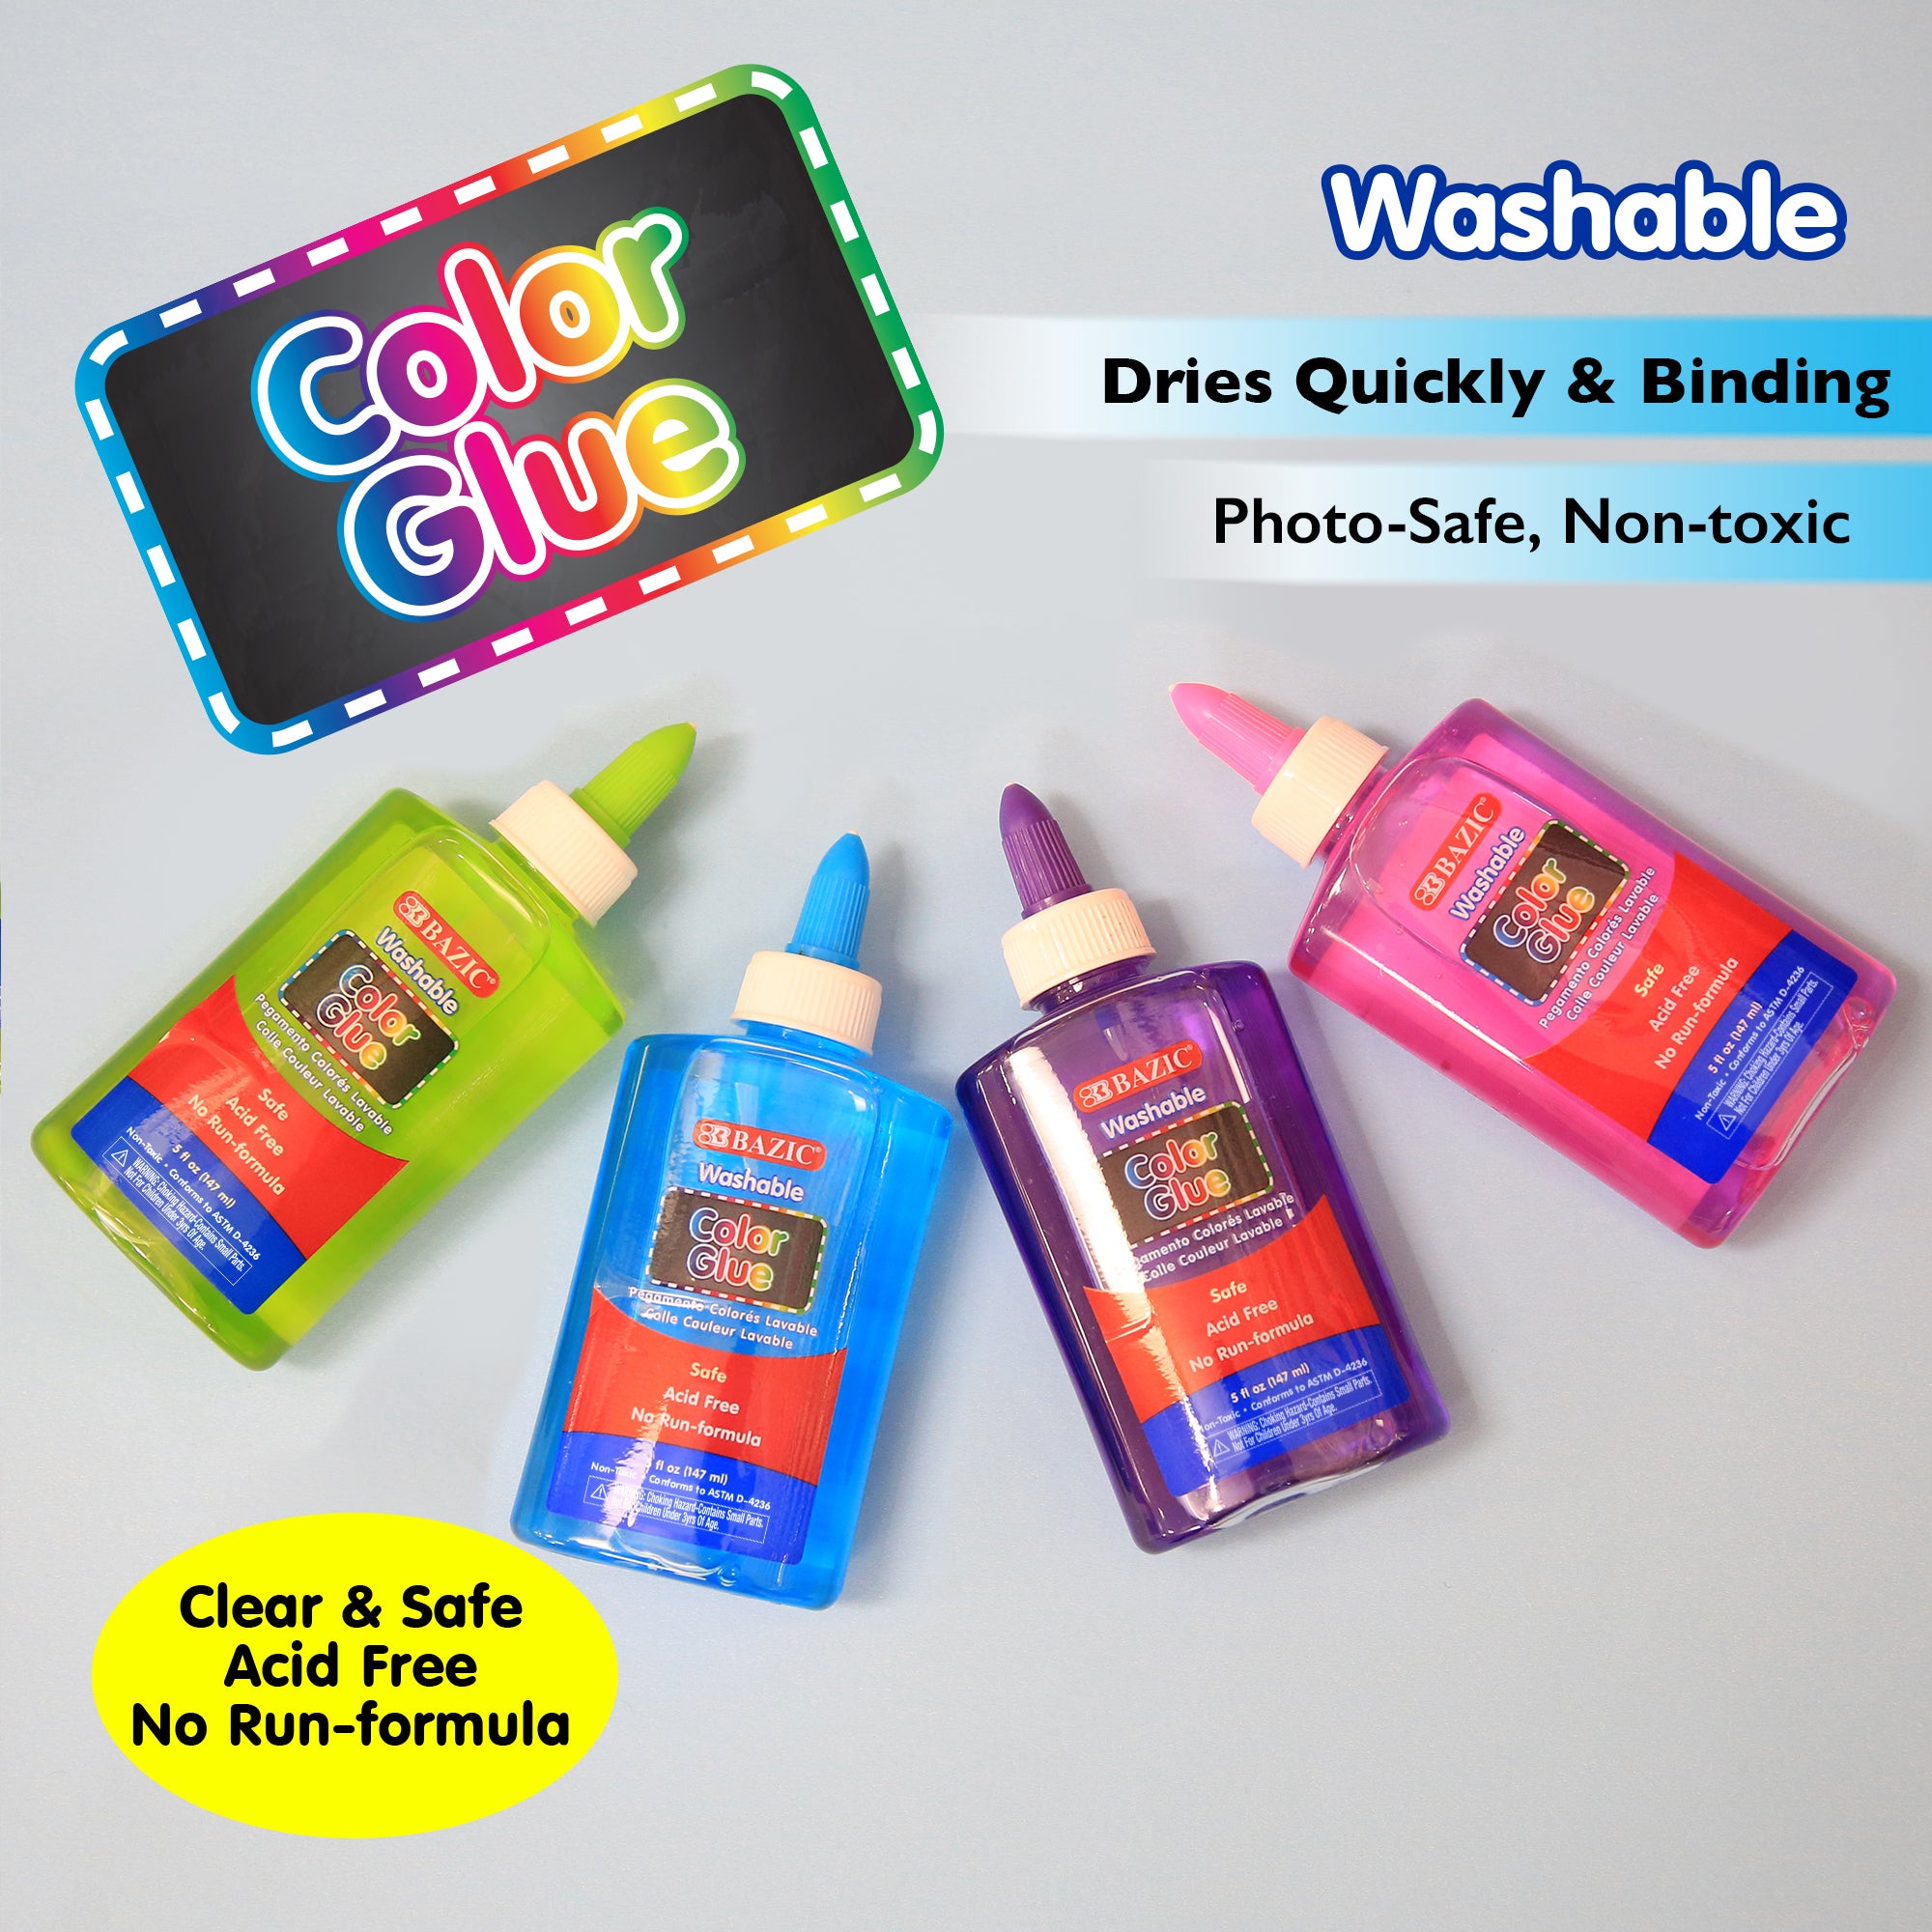 Colorations® Glow in the Dark Glue, 4 oz - Set of 4